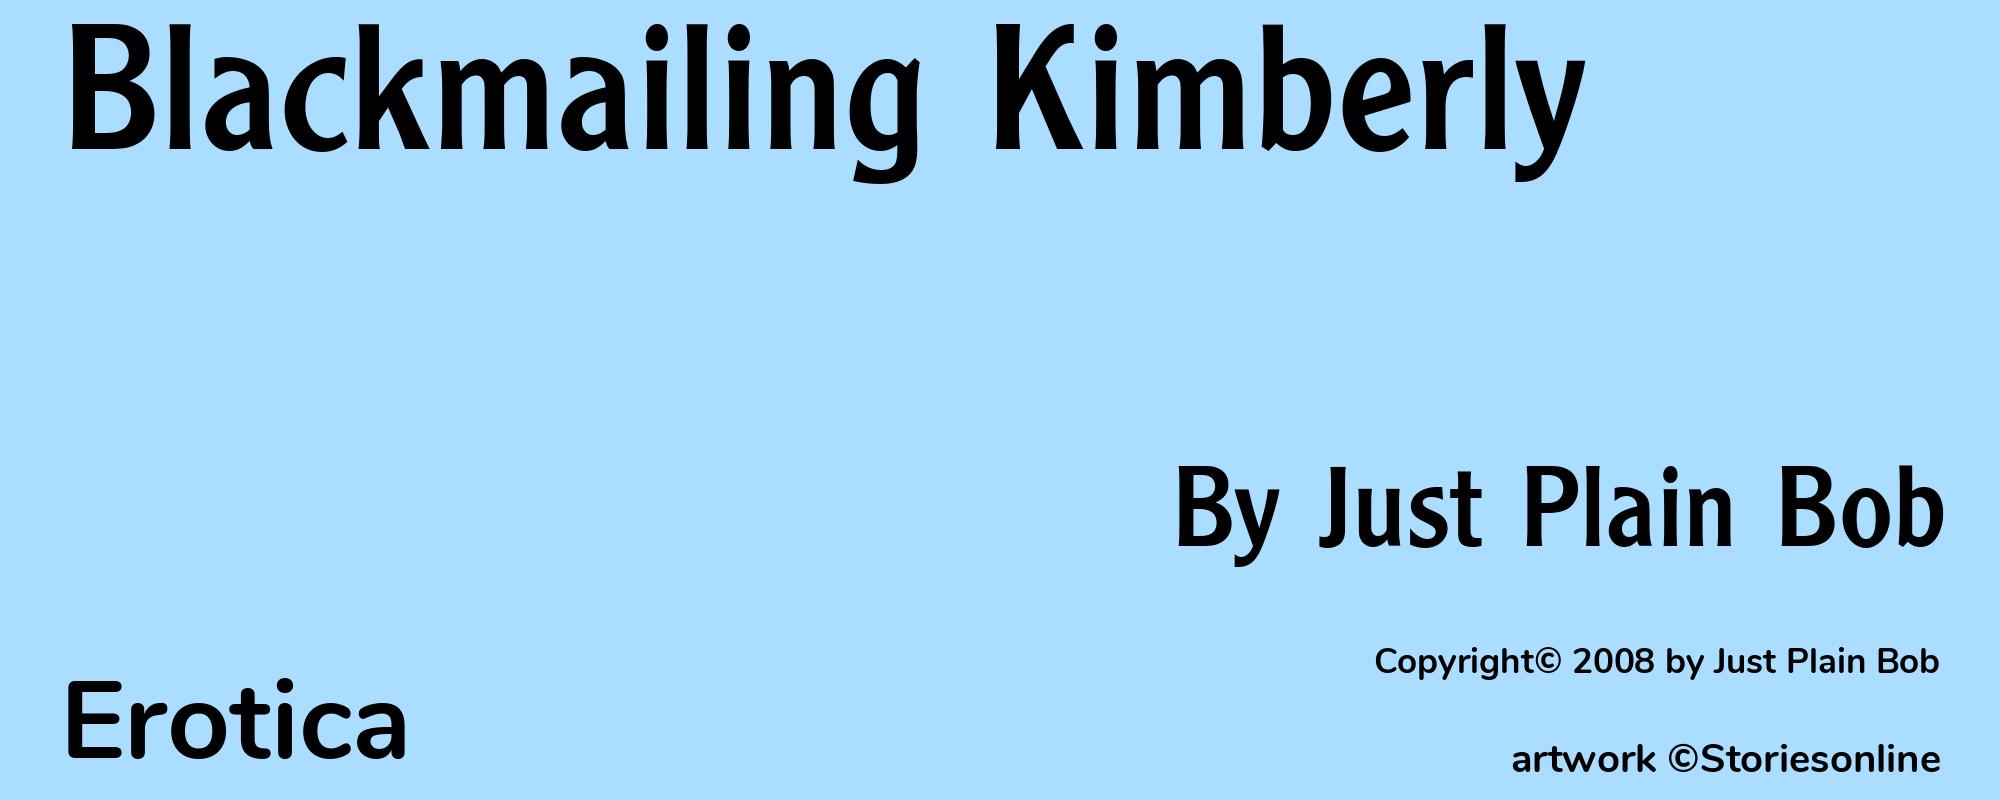 Blackmailing Kimberly - Cover